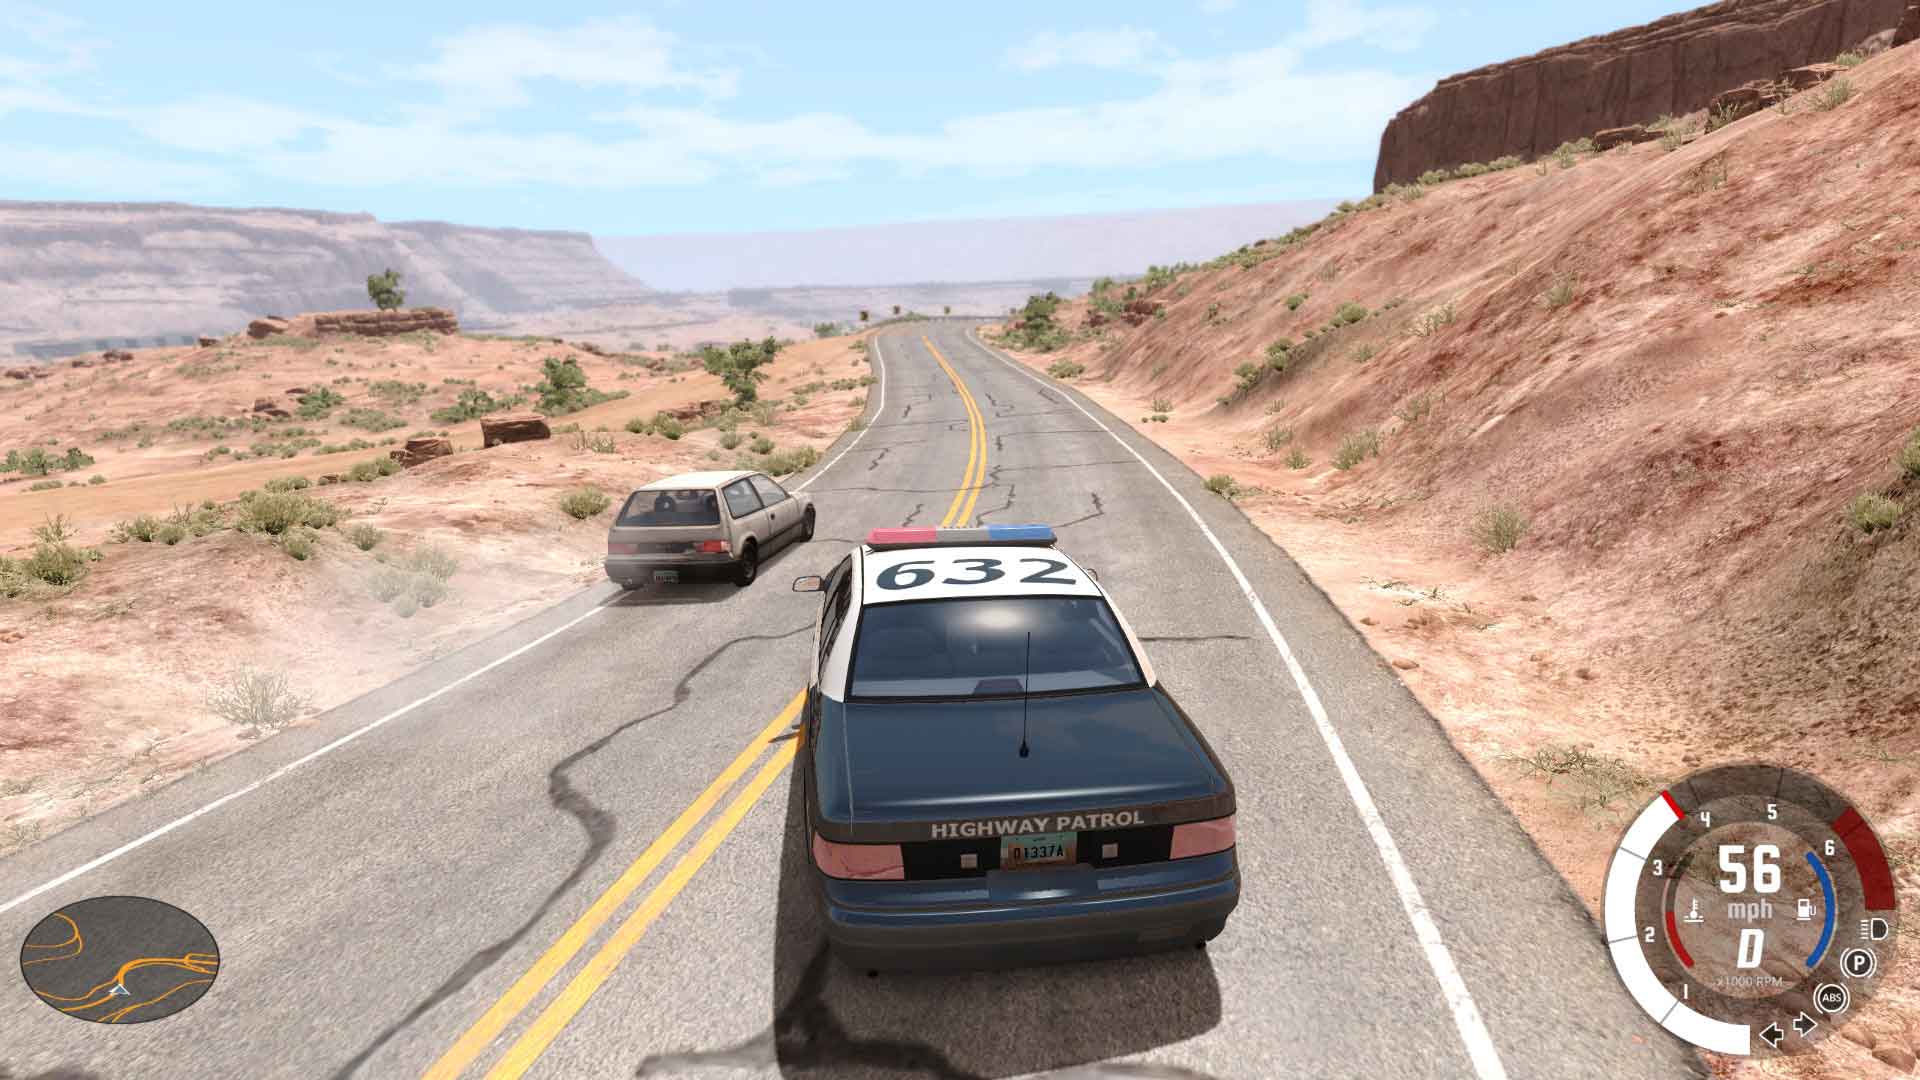 is beamng drive free on pc